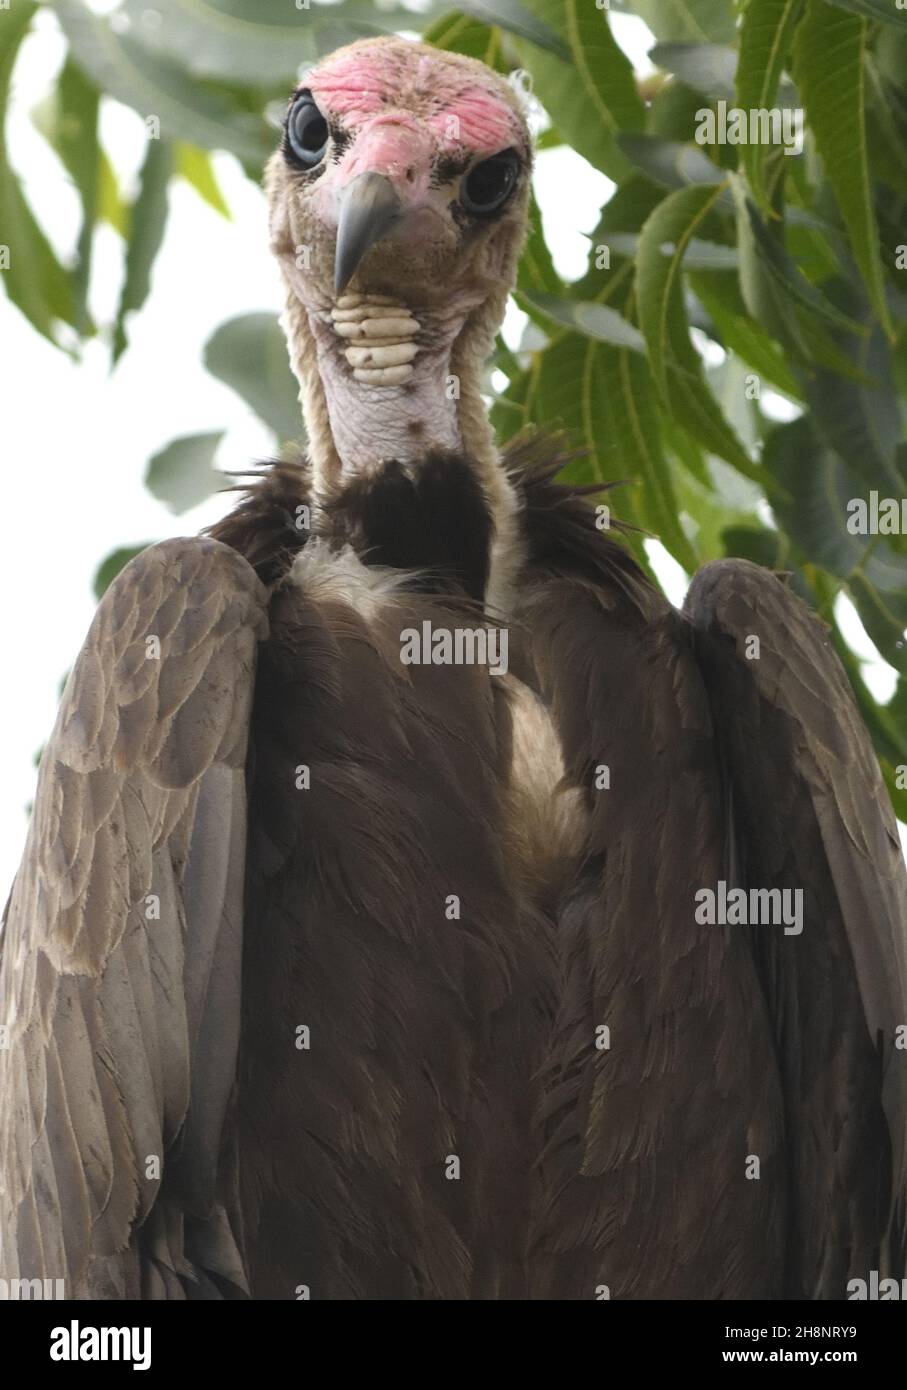 A hooded vulture  (Necrosyrtes monachus) sits in a tree. Lamin, The Republic of the Gambia. Stock Photo